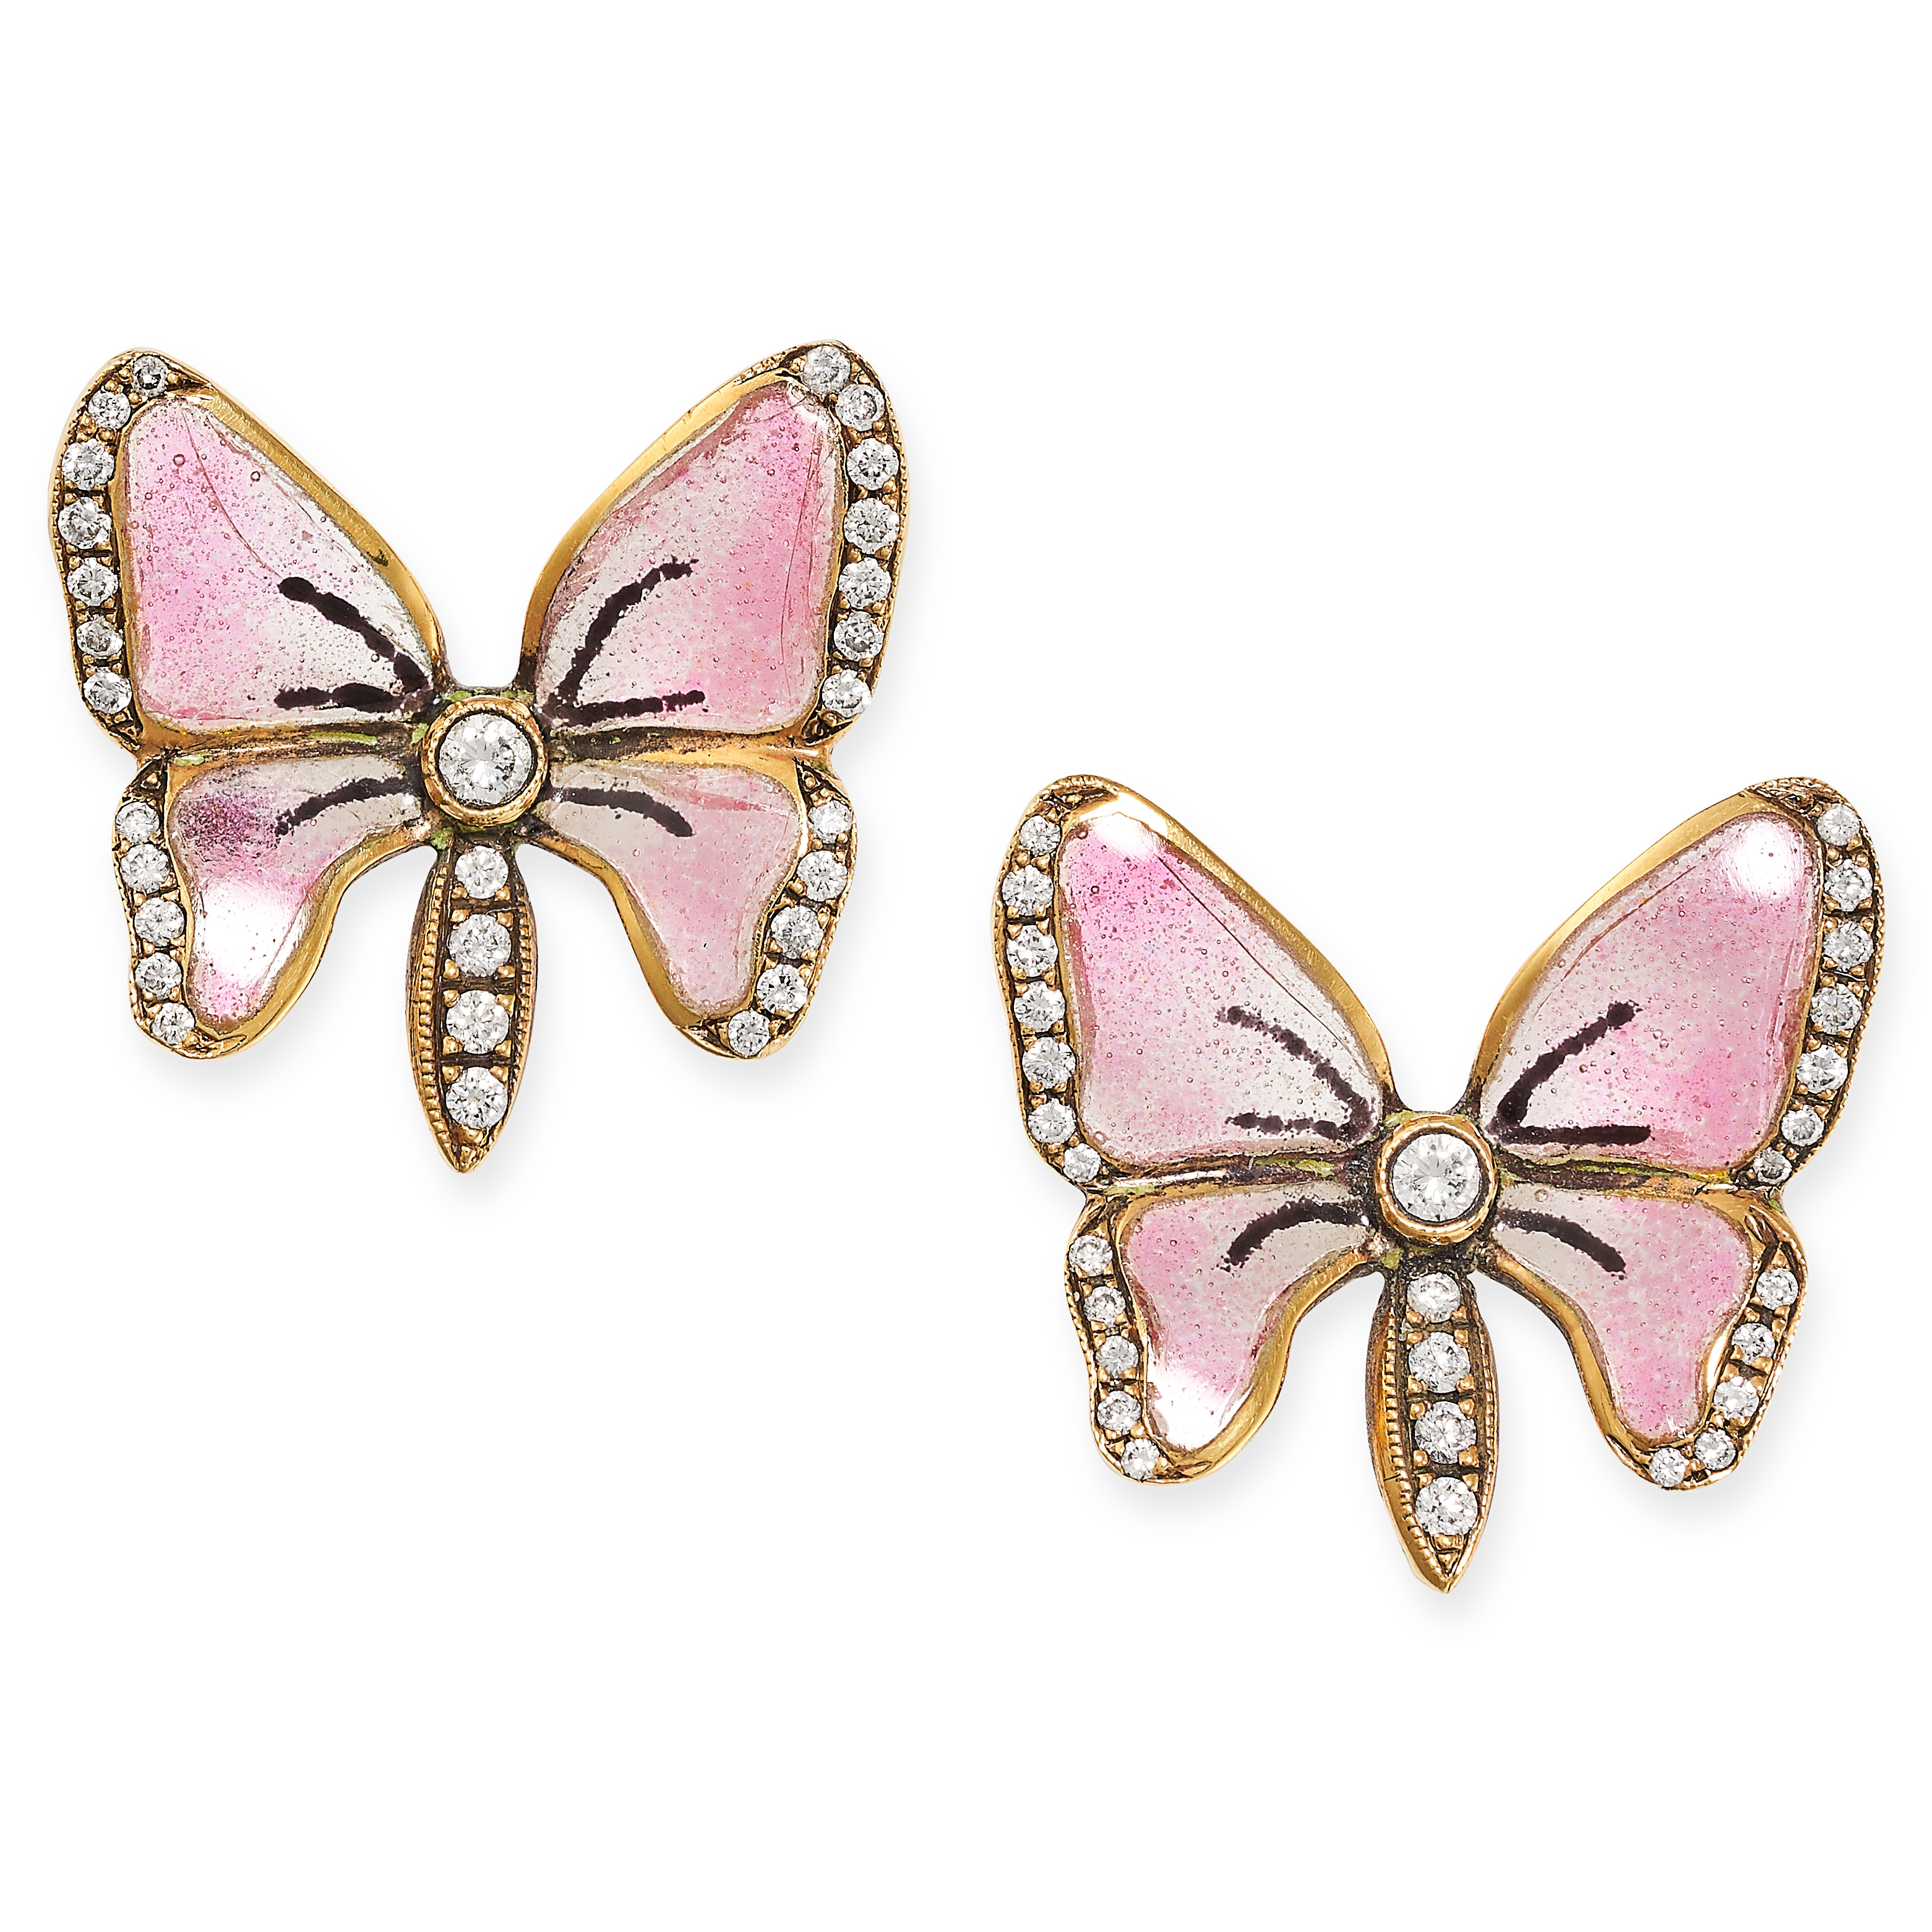 A PAIR OF PLIQUE A JOUR ENAMEL AND DIAMOND BUTTERFLY EARRINGS in 18ct yellow gold, each designed ...